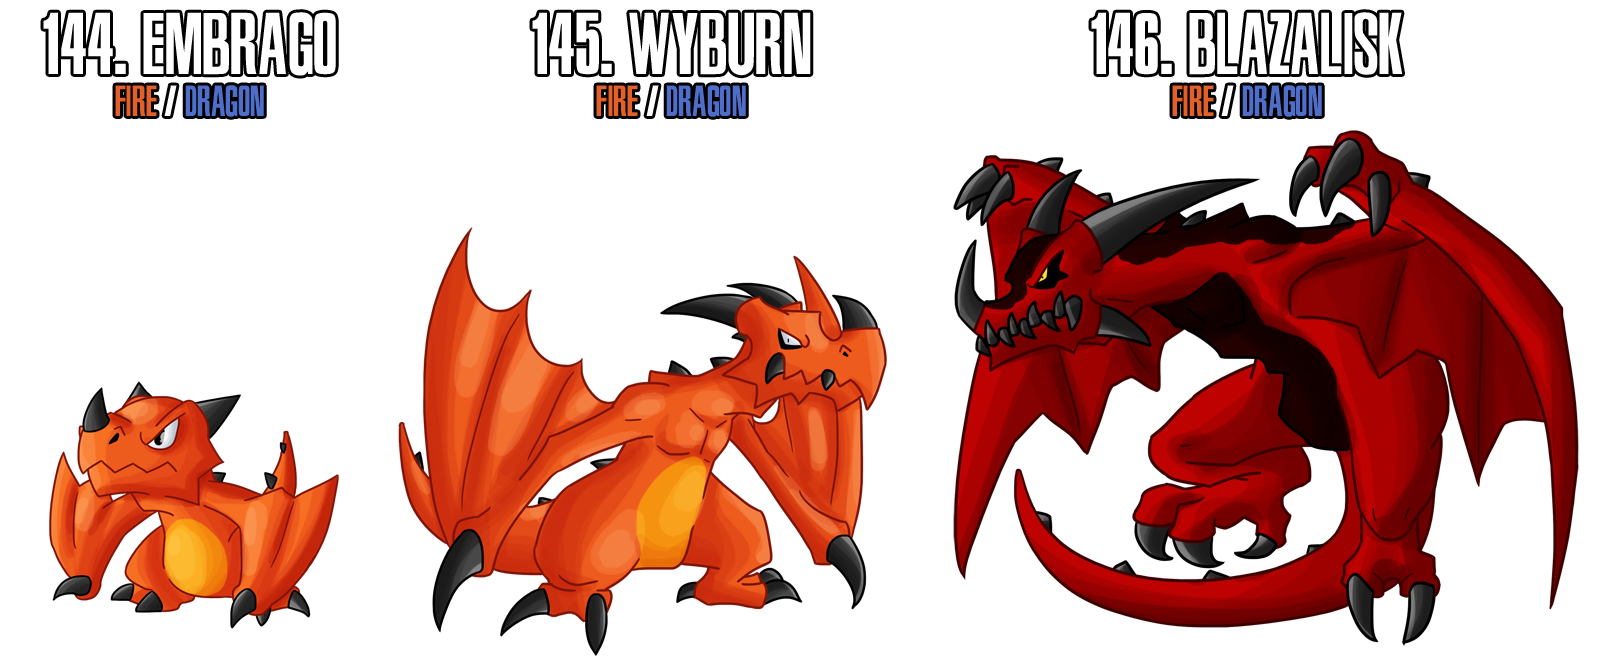 fakemon__144___146_by_masterthecreater-d4tq55p.png